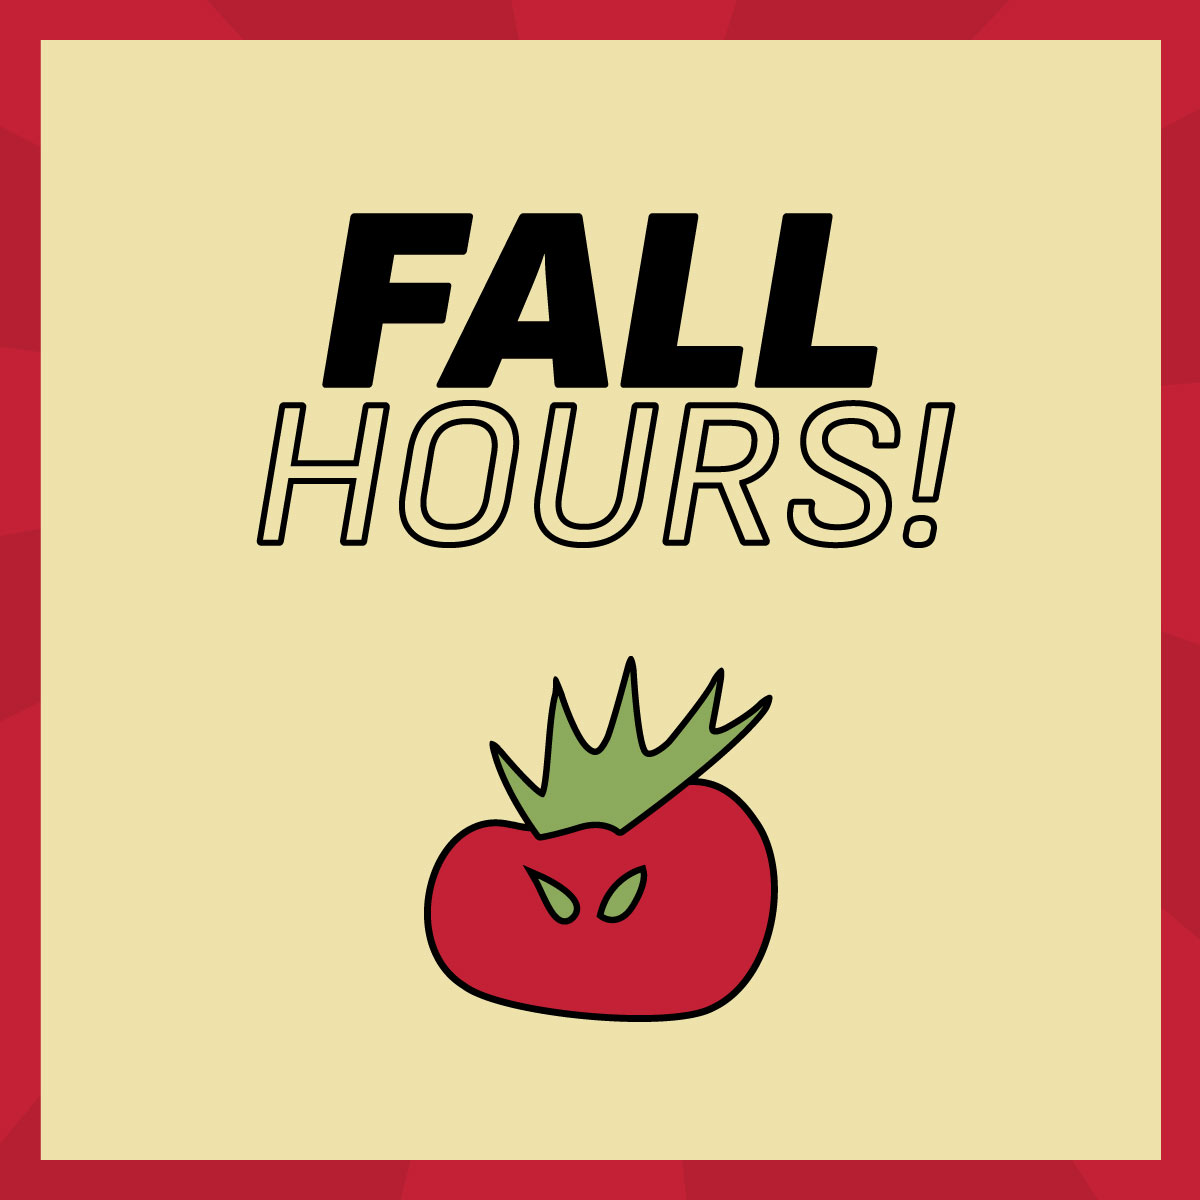 NEW HOURS!